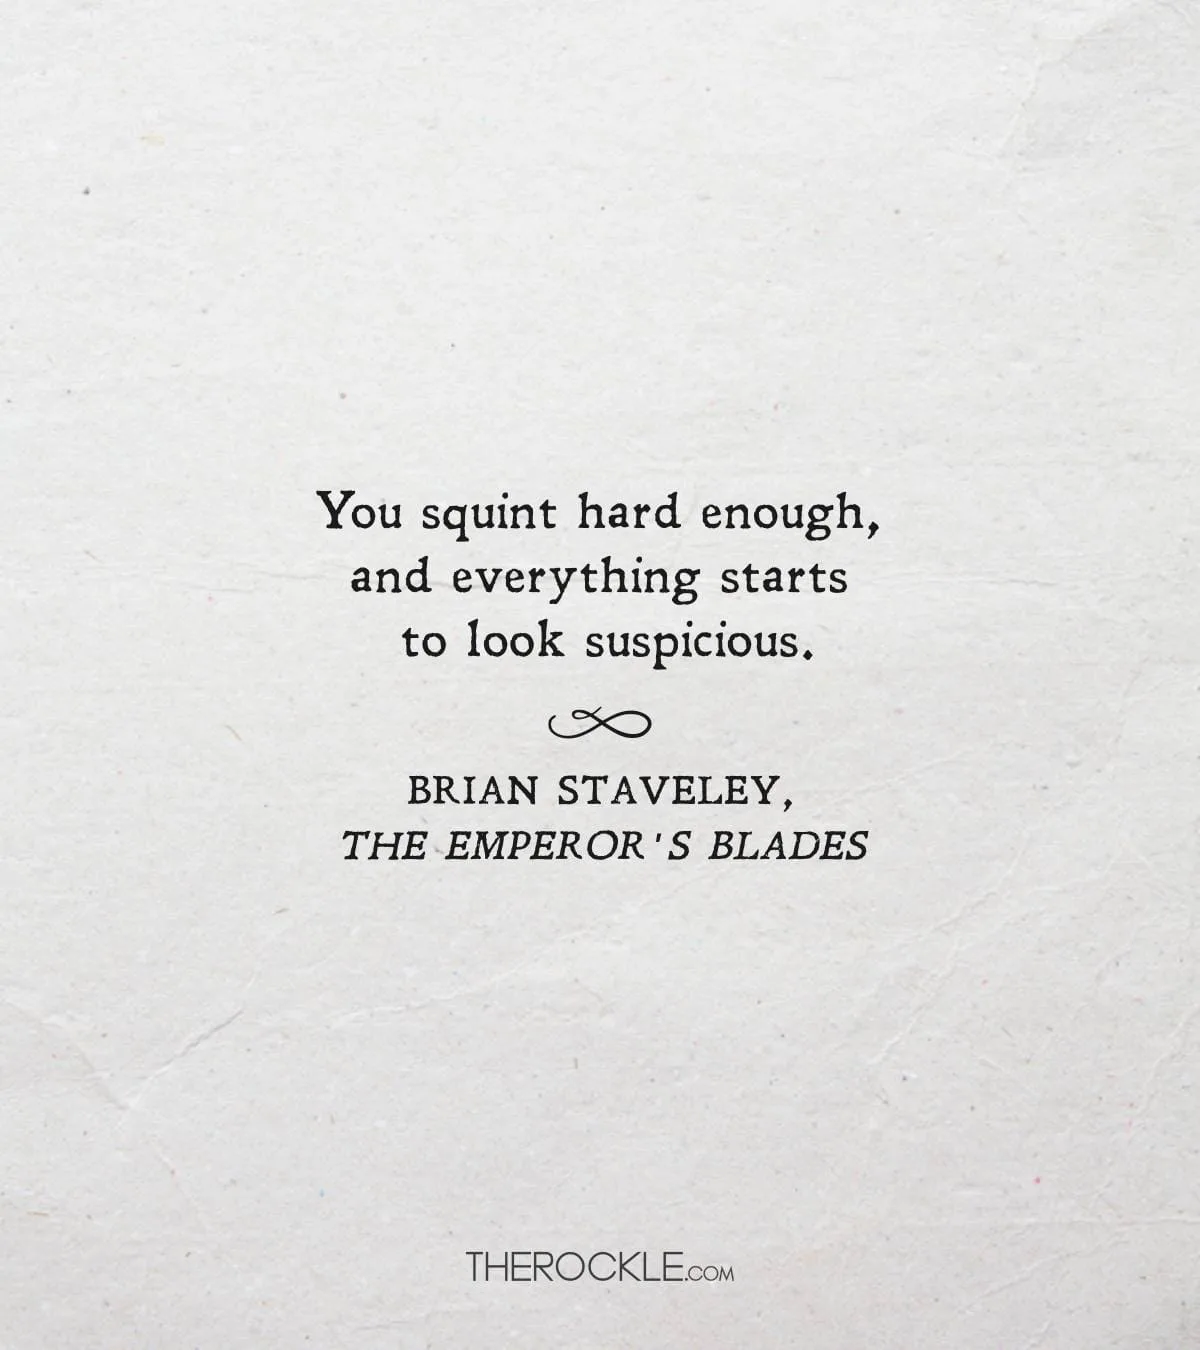 Quote from Brian Staveley's The Emperor’s Blades